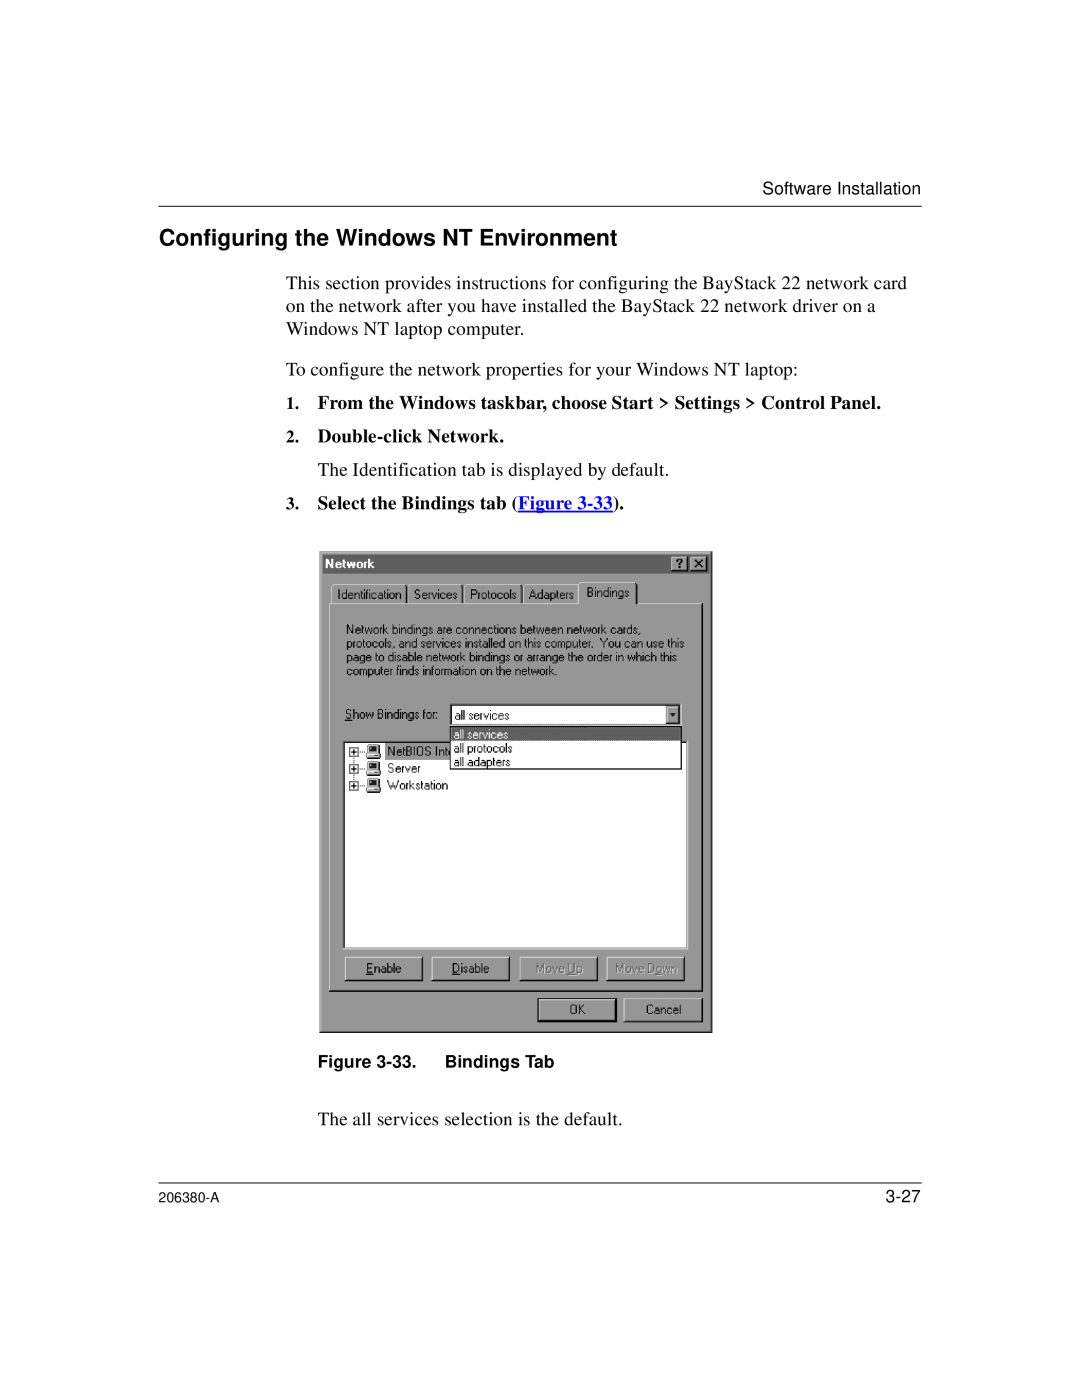 3Com 206380-A manual Configuring the Windows NT Environment, Double-clickNetwork, Select the Bindings tab Figure 